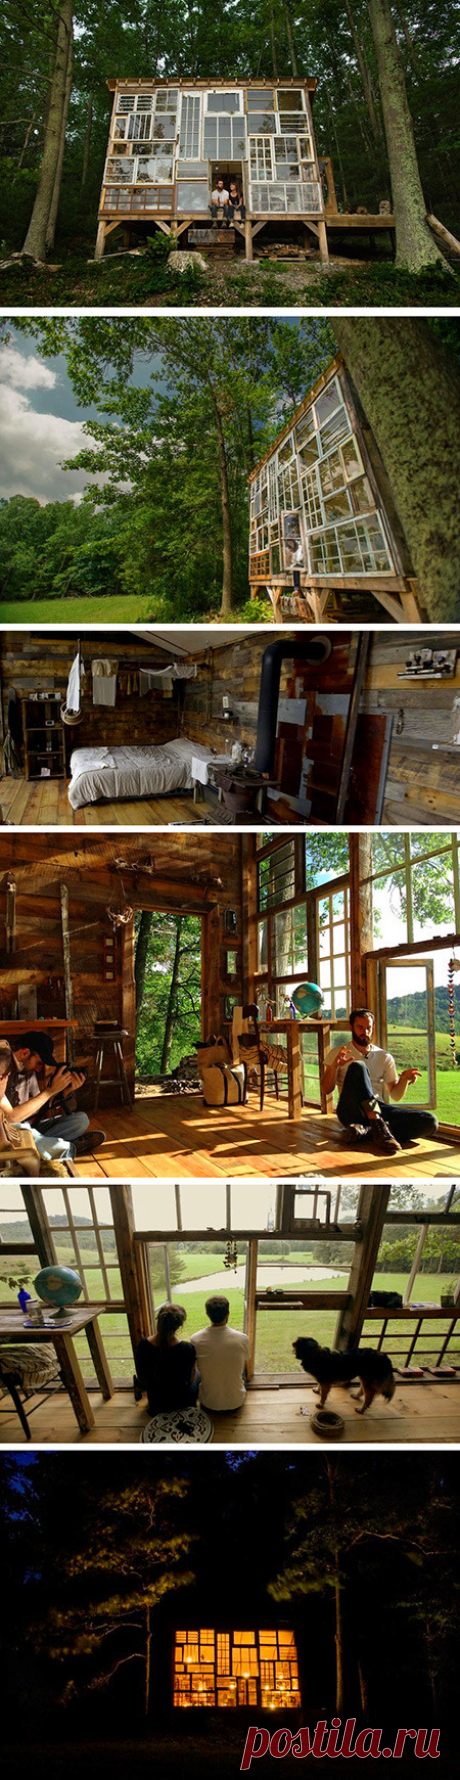 6 Pictures of a Beautiful Cabin in the Woods Built for $500, Made from Discarded Windows - TechEBlog